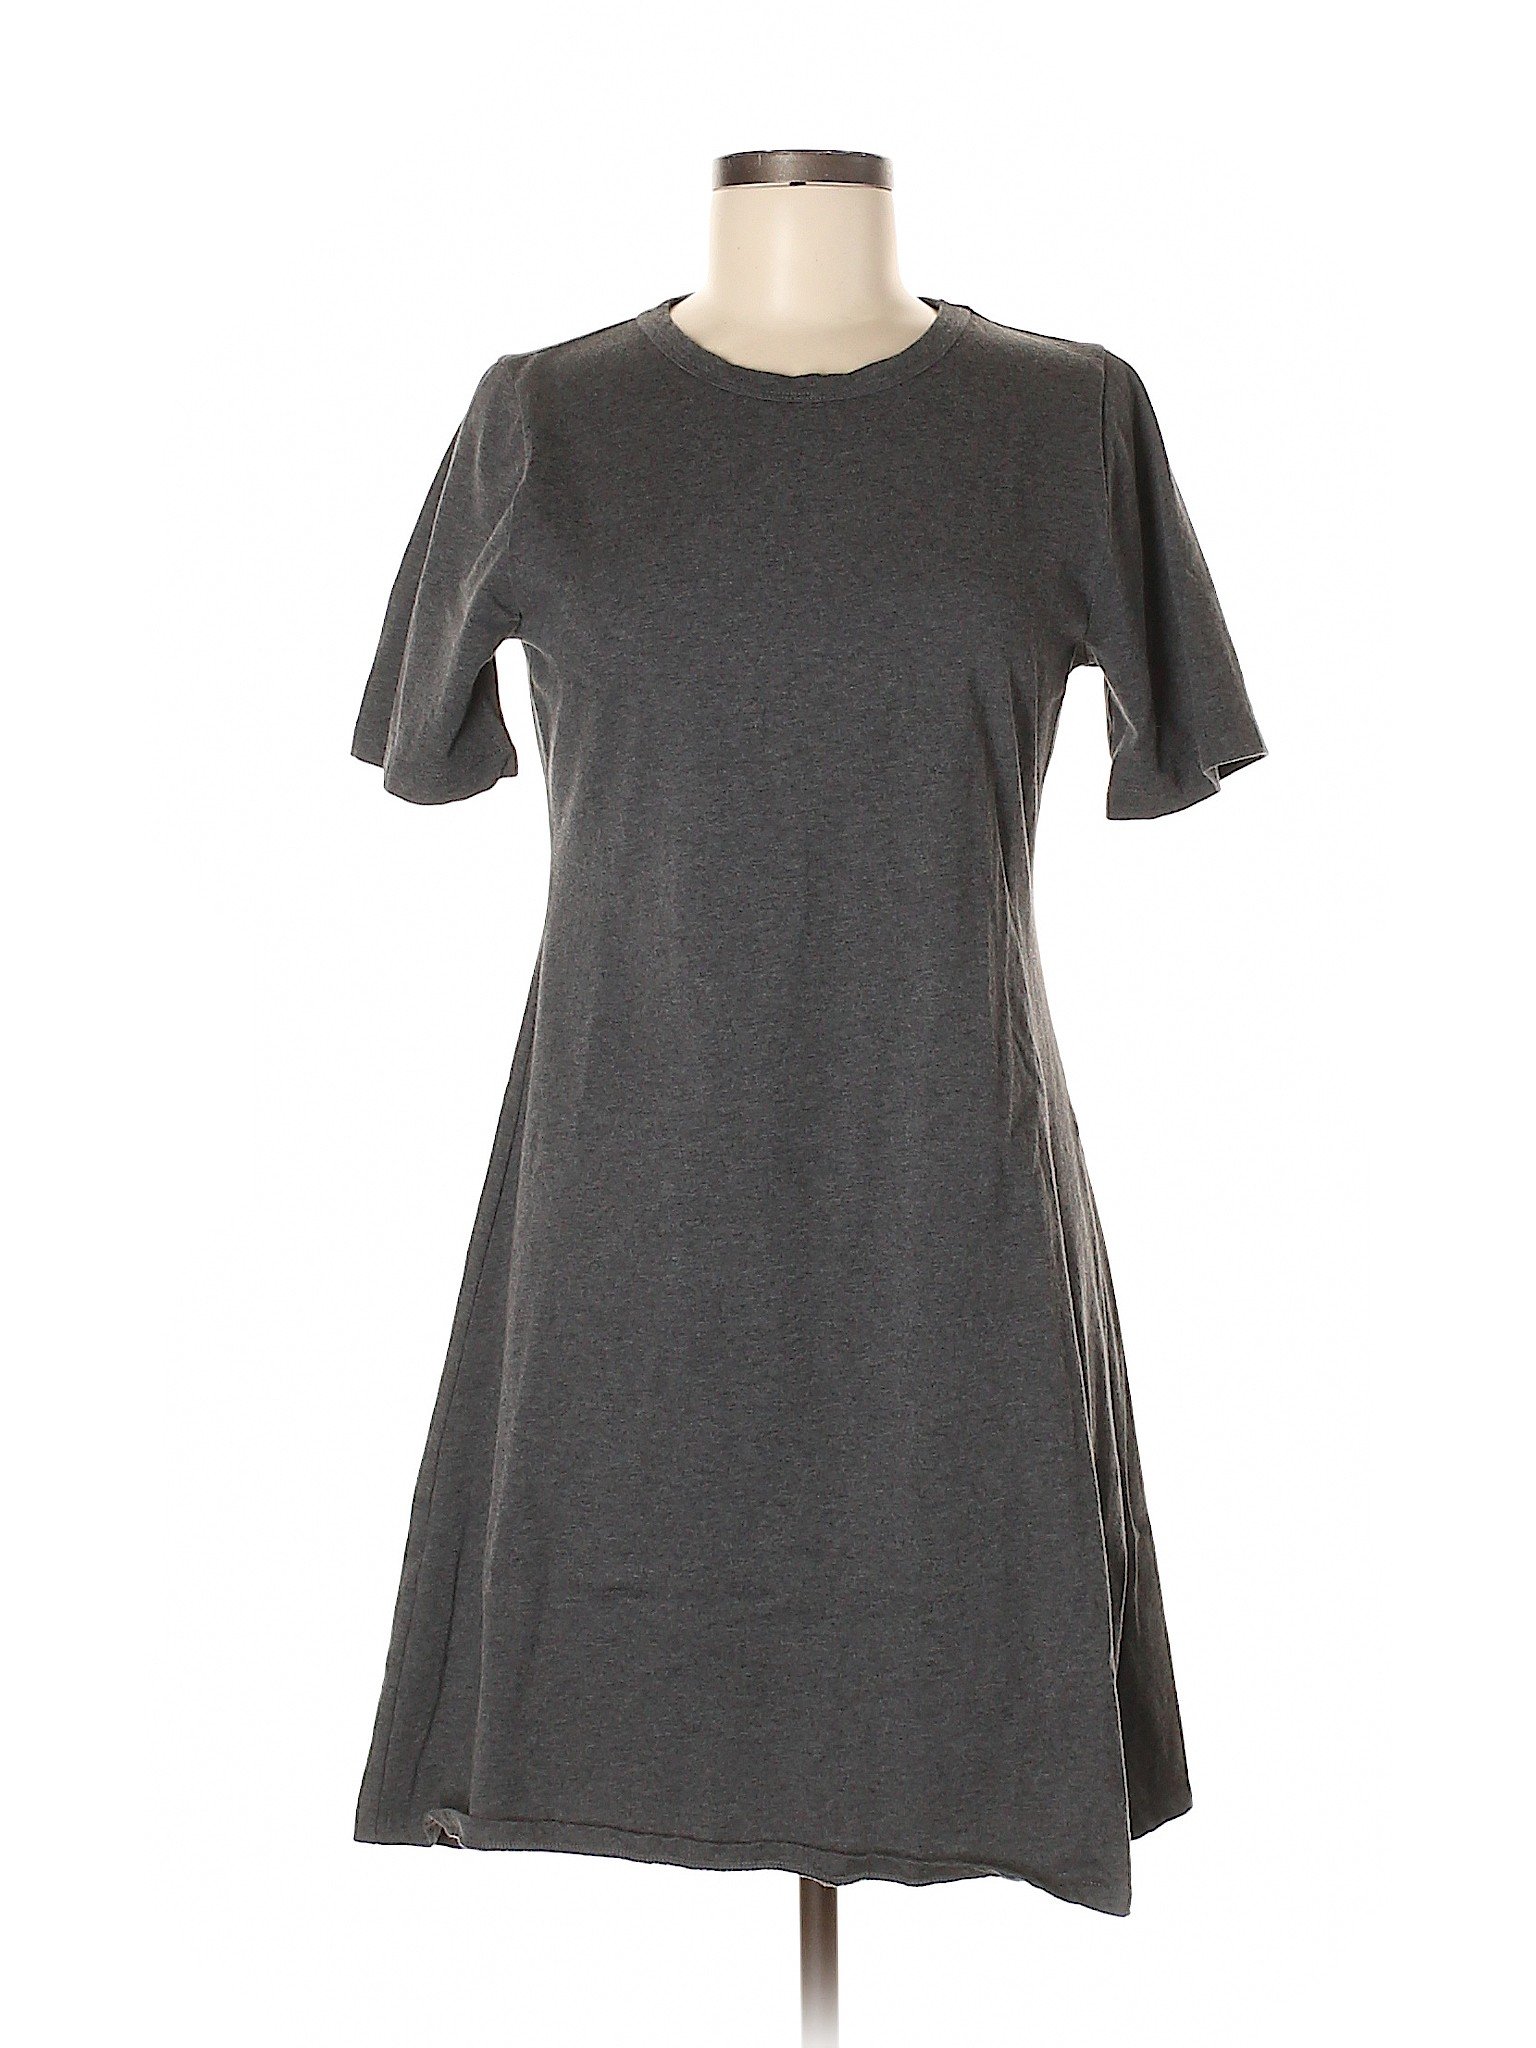 J.Crew 100% Cotton Solid Gray Casual Dress Size M - 86% off | thredUP